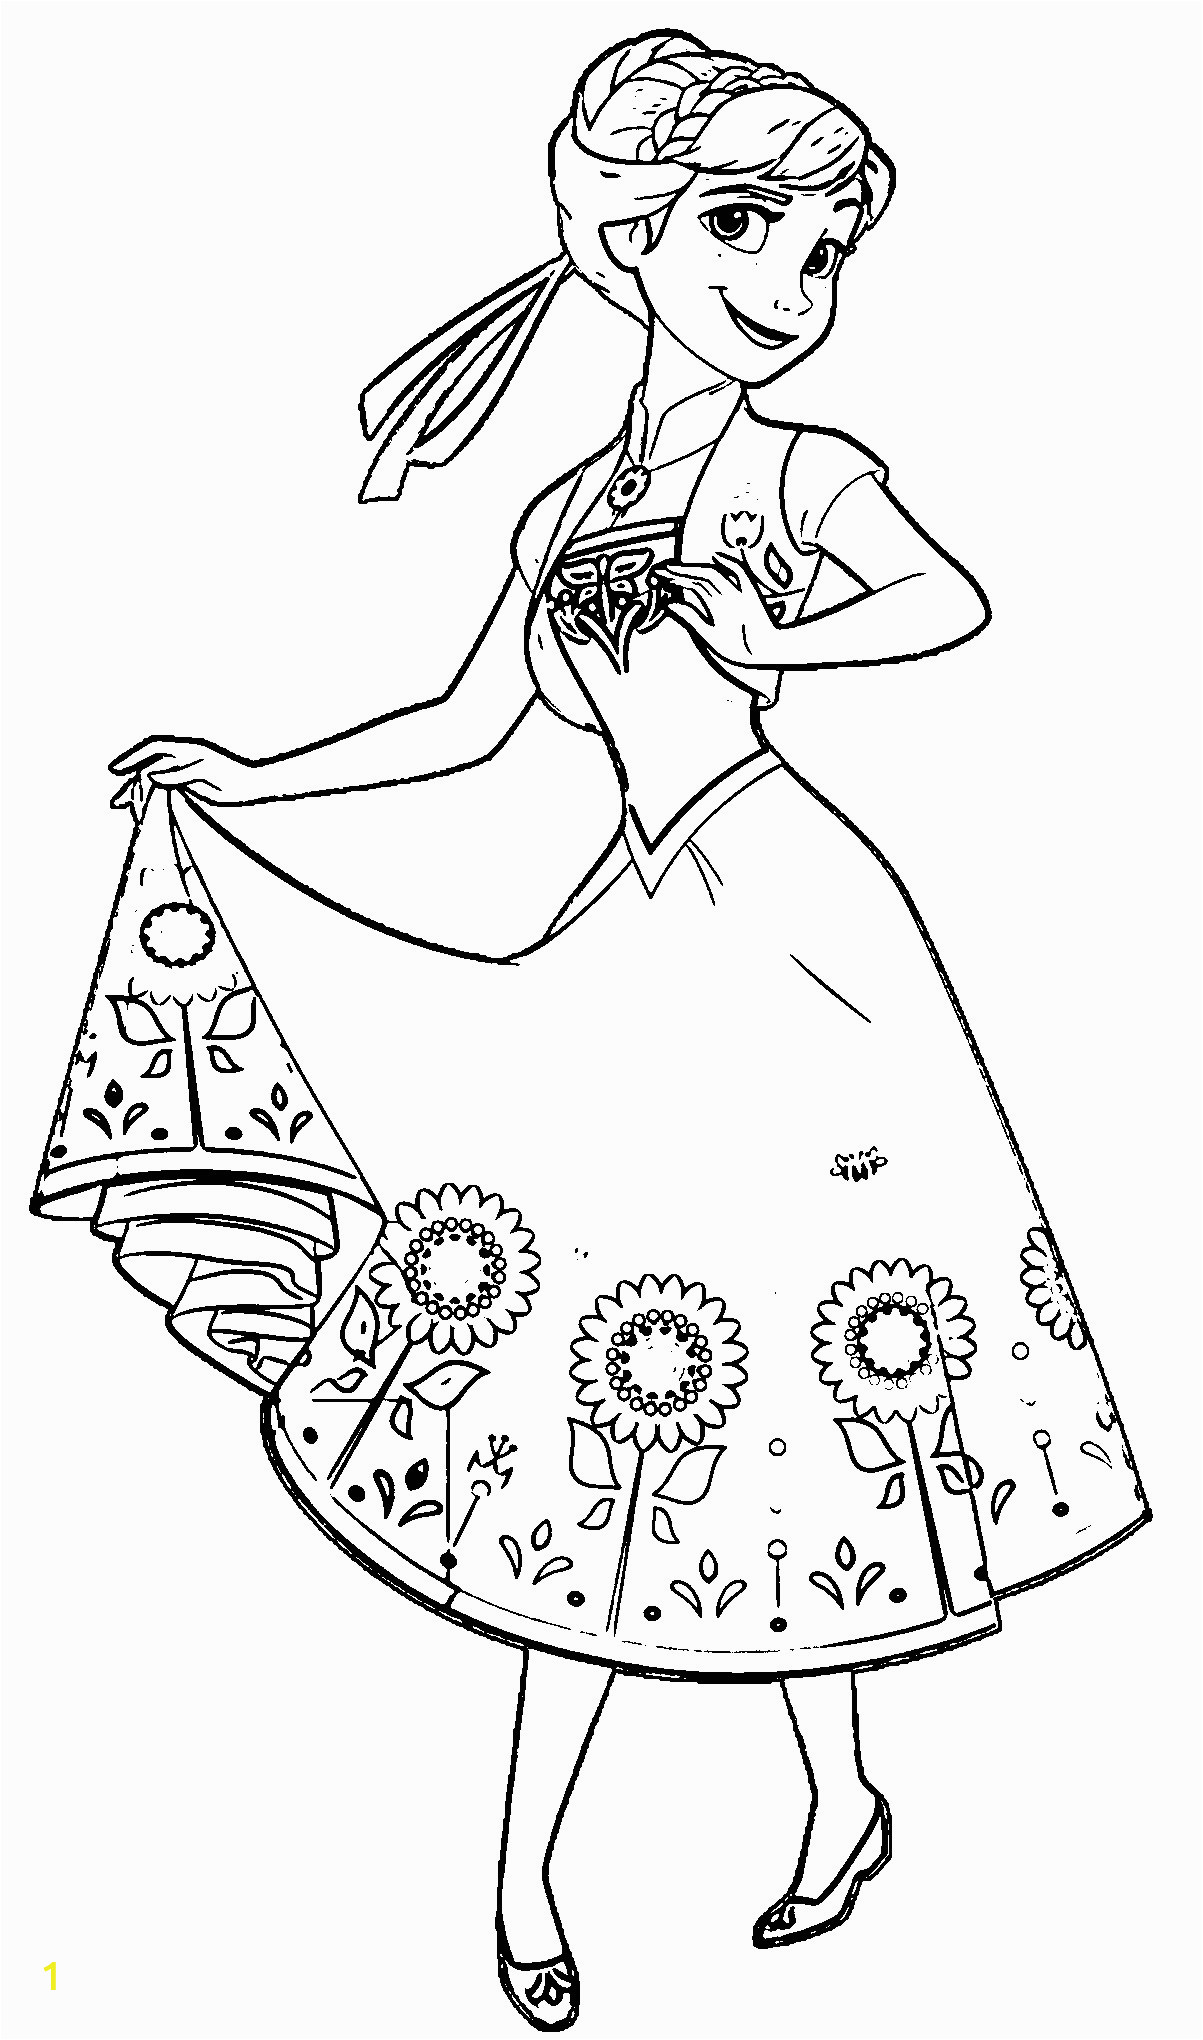 Frozen Fever Coloring Pages to Print Frozen Fever Coloring Pages at Getcolorings